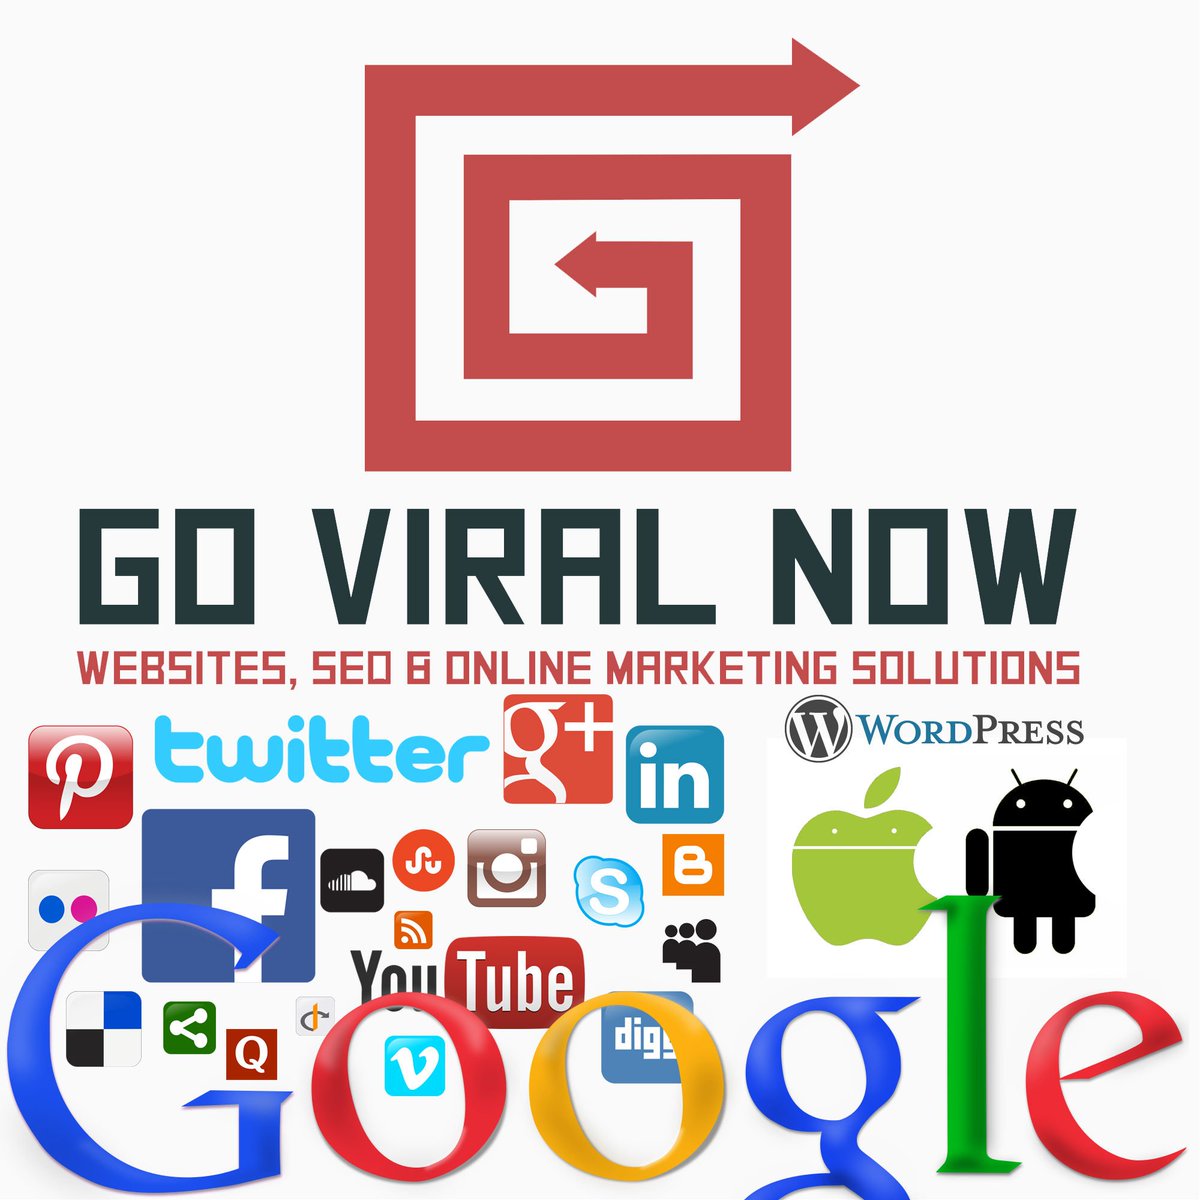 Rent & Rank Websites. Get a Website, SEO & SMM for a monthly fee. No massive outlay. Great for startups! goviralnow.net/small-business…